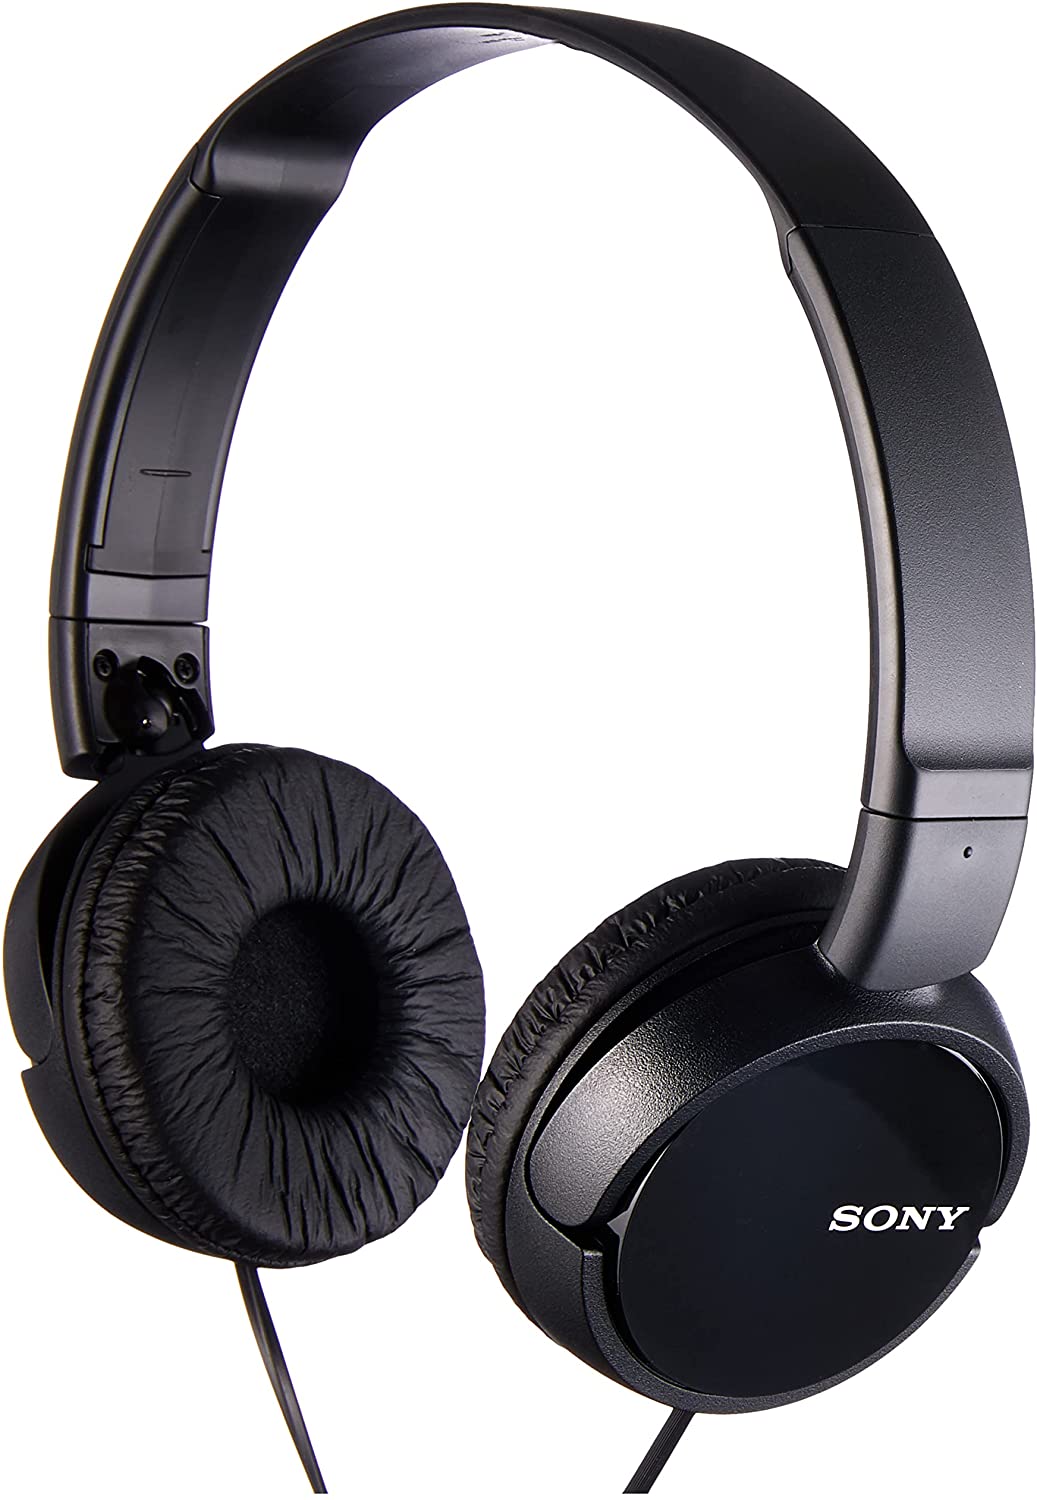 Sony MDR-ZX110 foldable ironing headphones, black